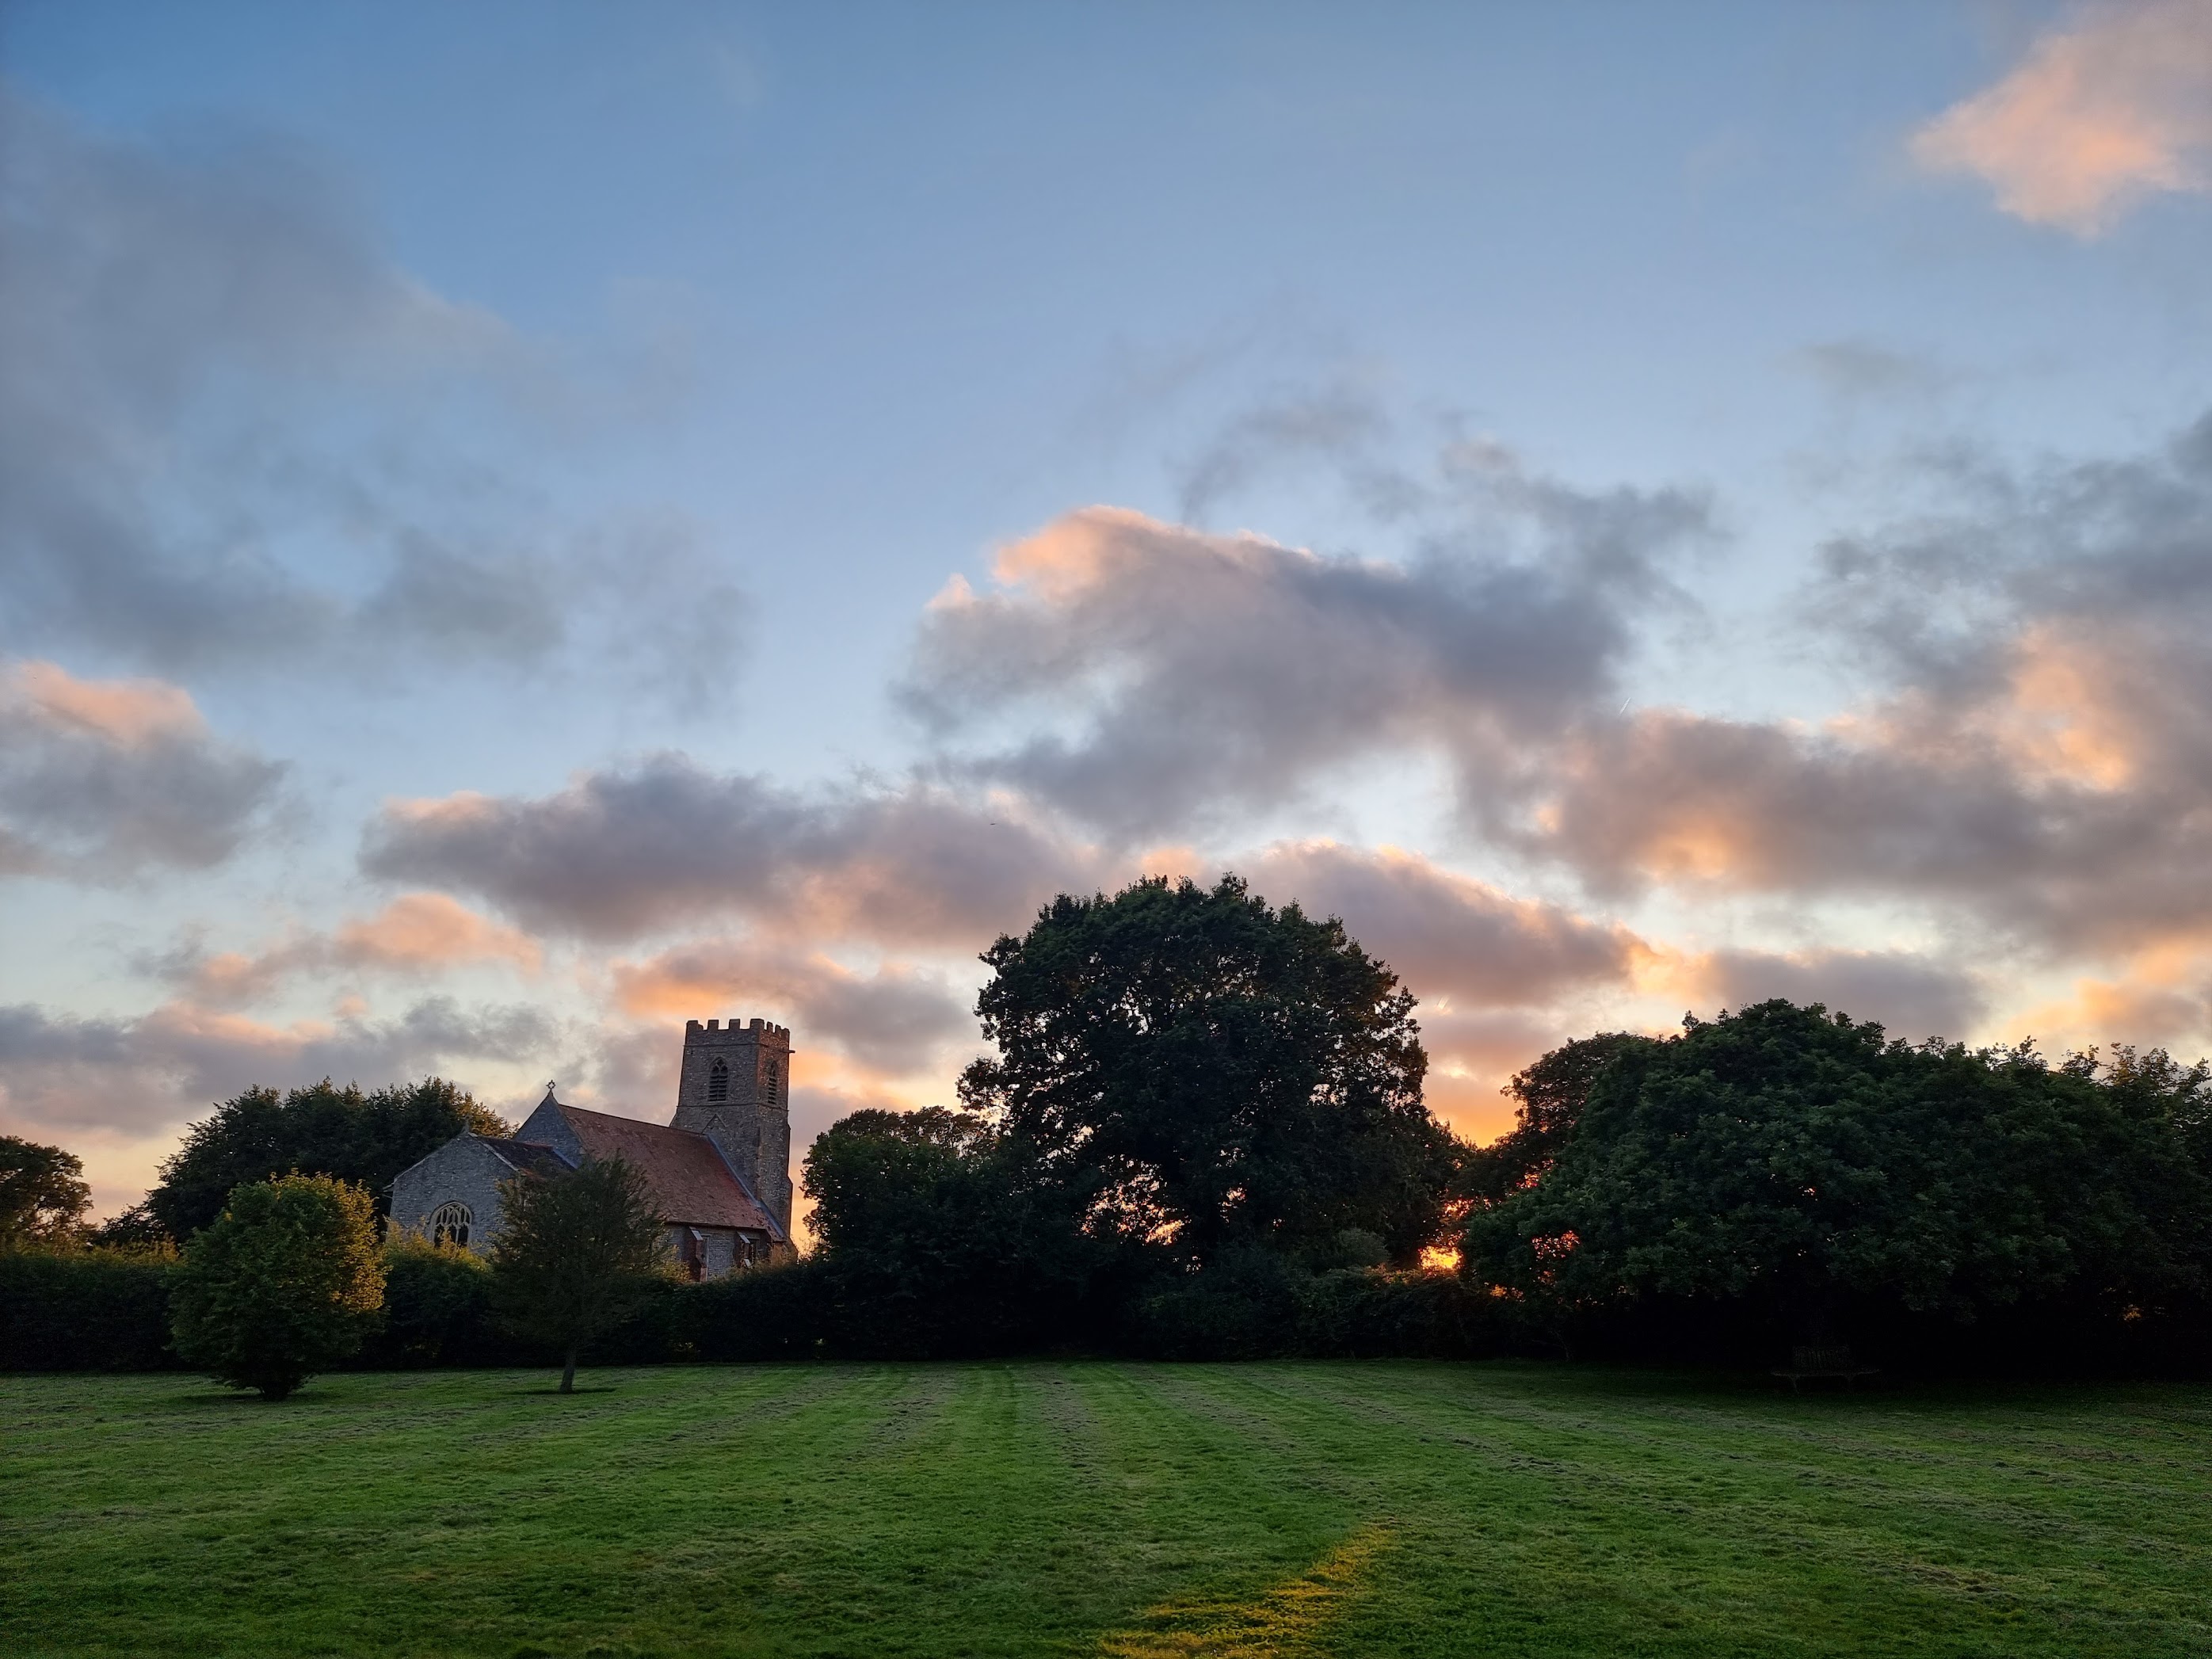 A photo of the church next to our holiday home showing the beautiful summer sunset